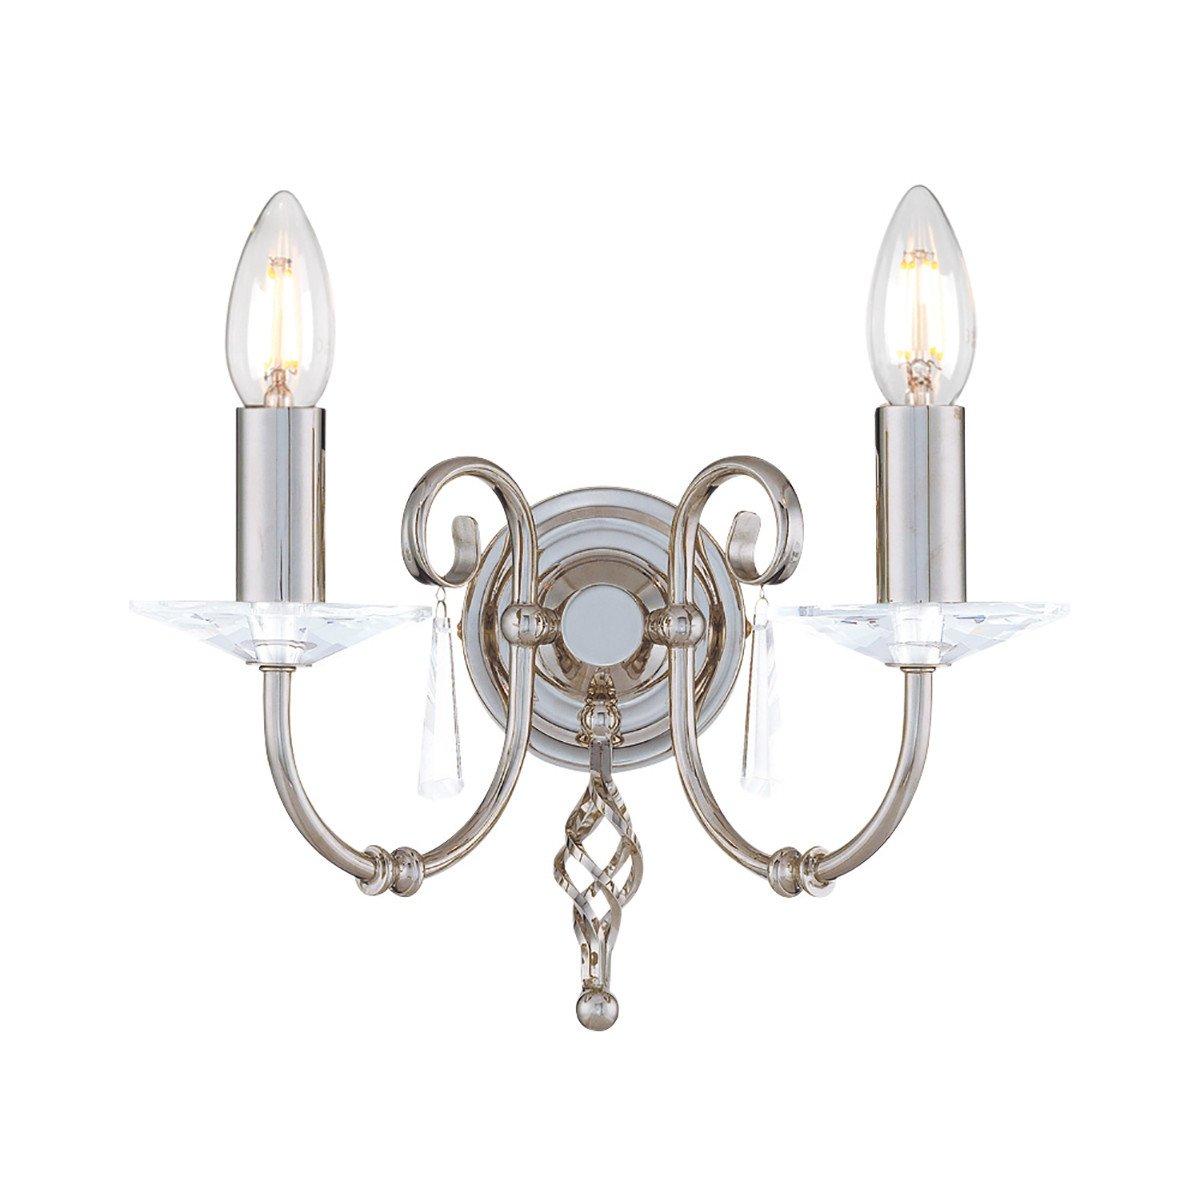 Aegean 2 Light Indoor Candle Wall Light Polished Nickel E14